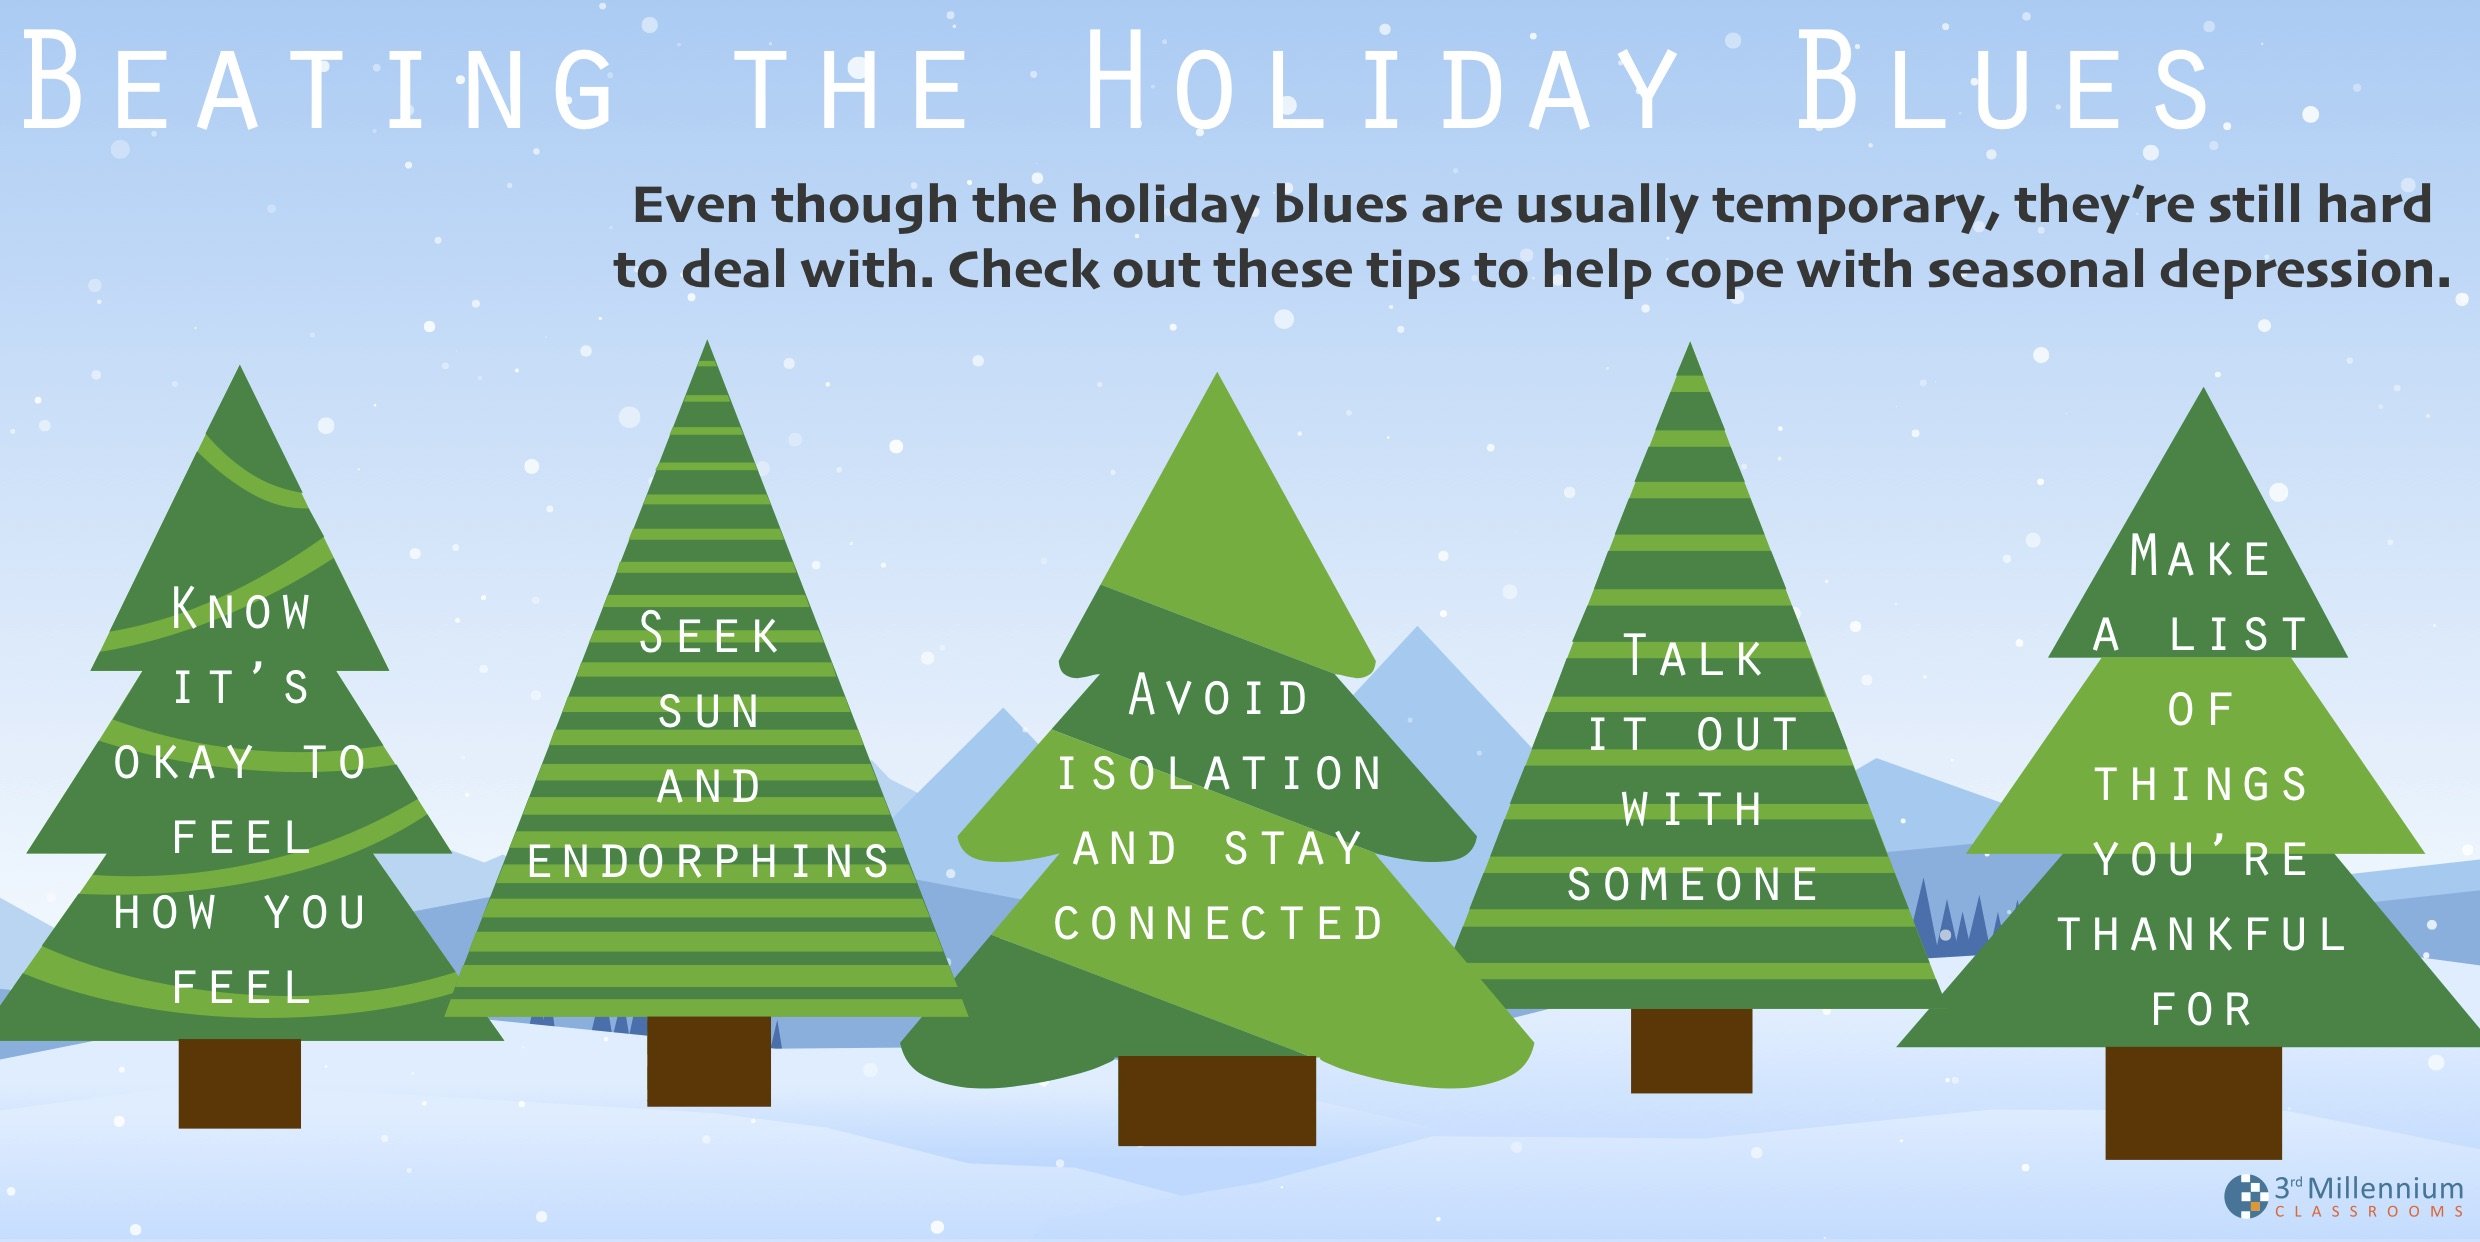 Tips for beating the holiday blues